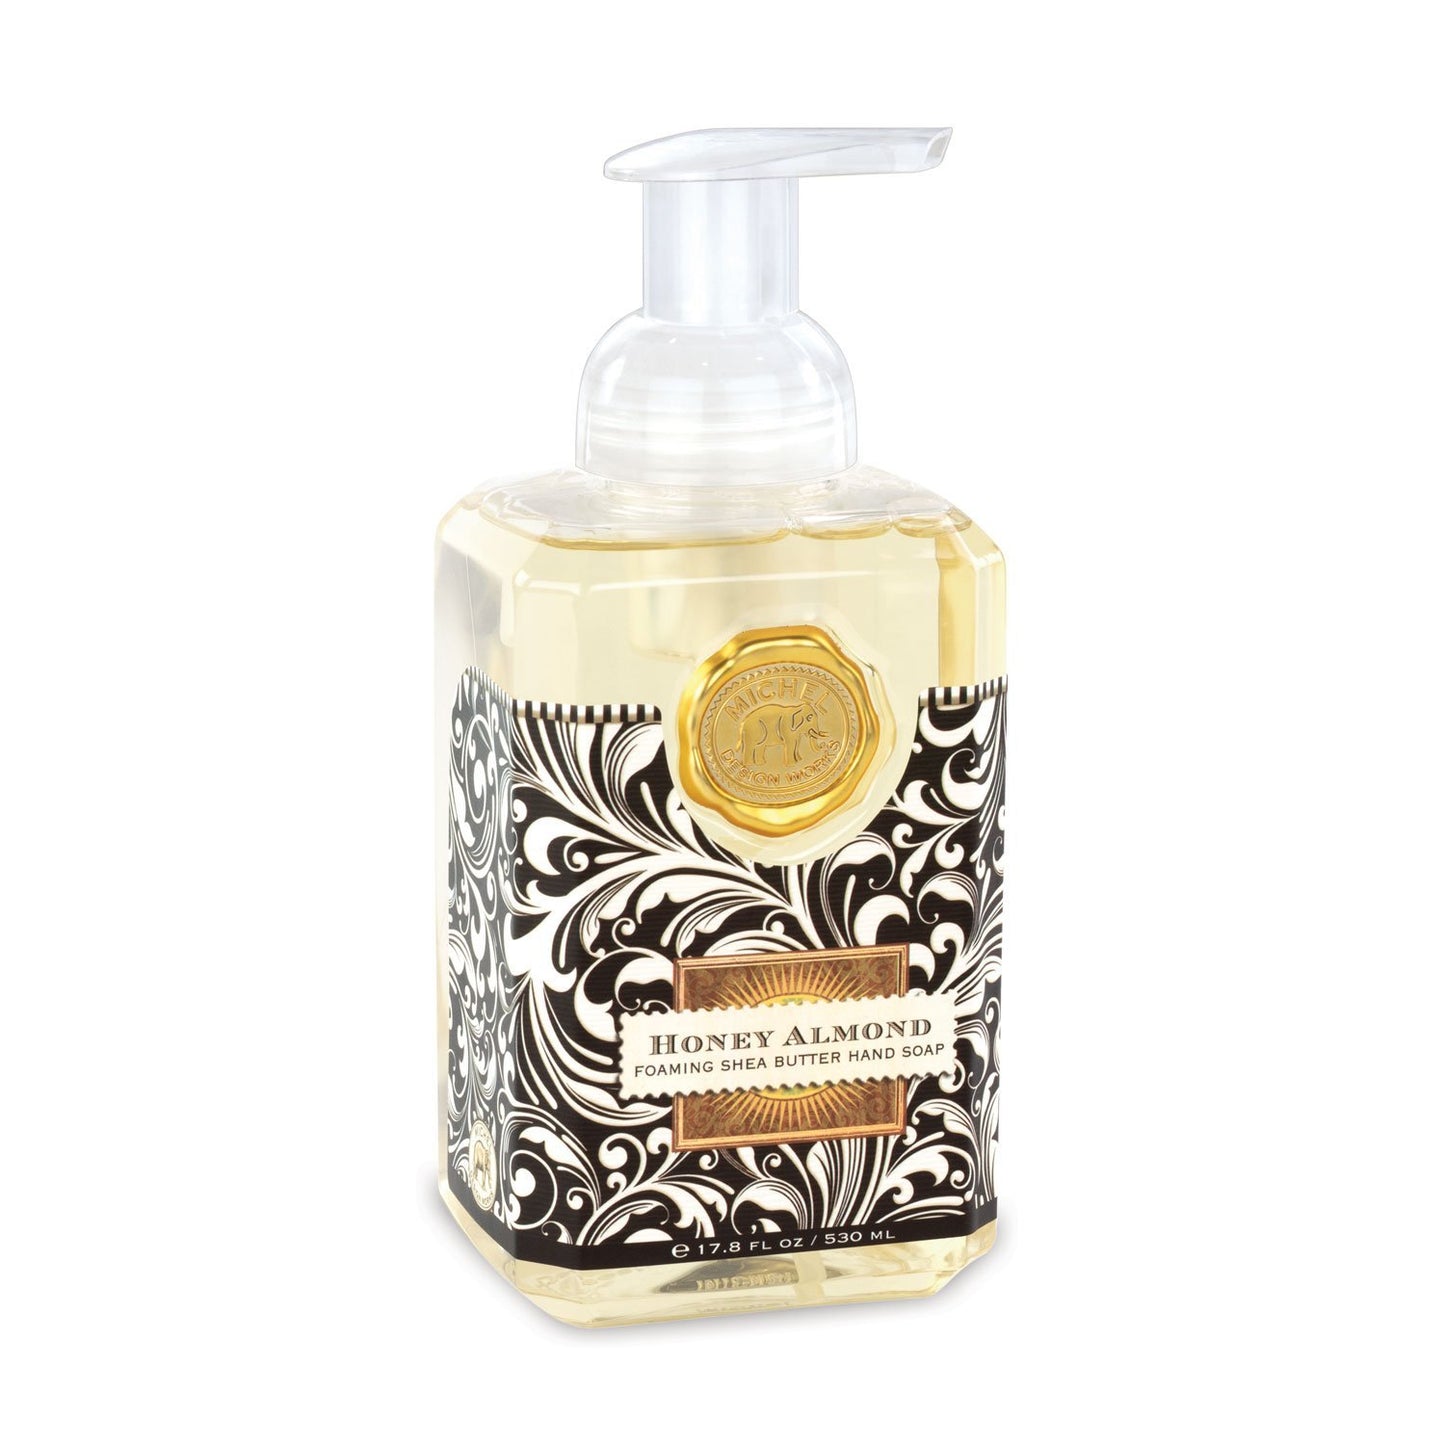 honey almond foaming hand soap on a white background